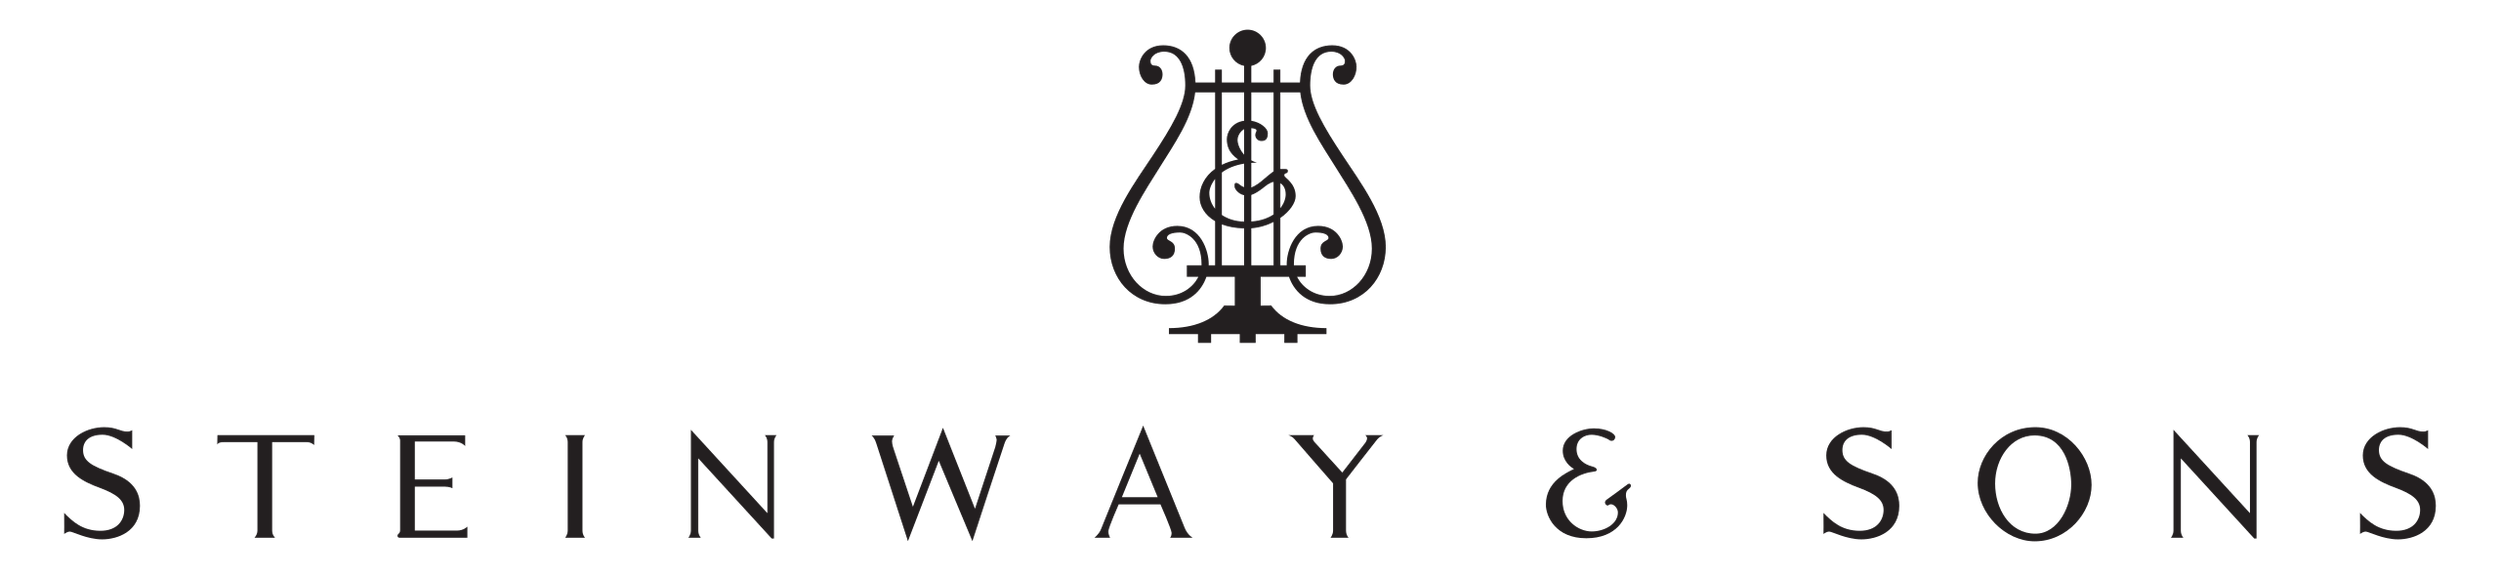 Steinway_and_Sons_logo.svg.png